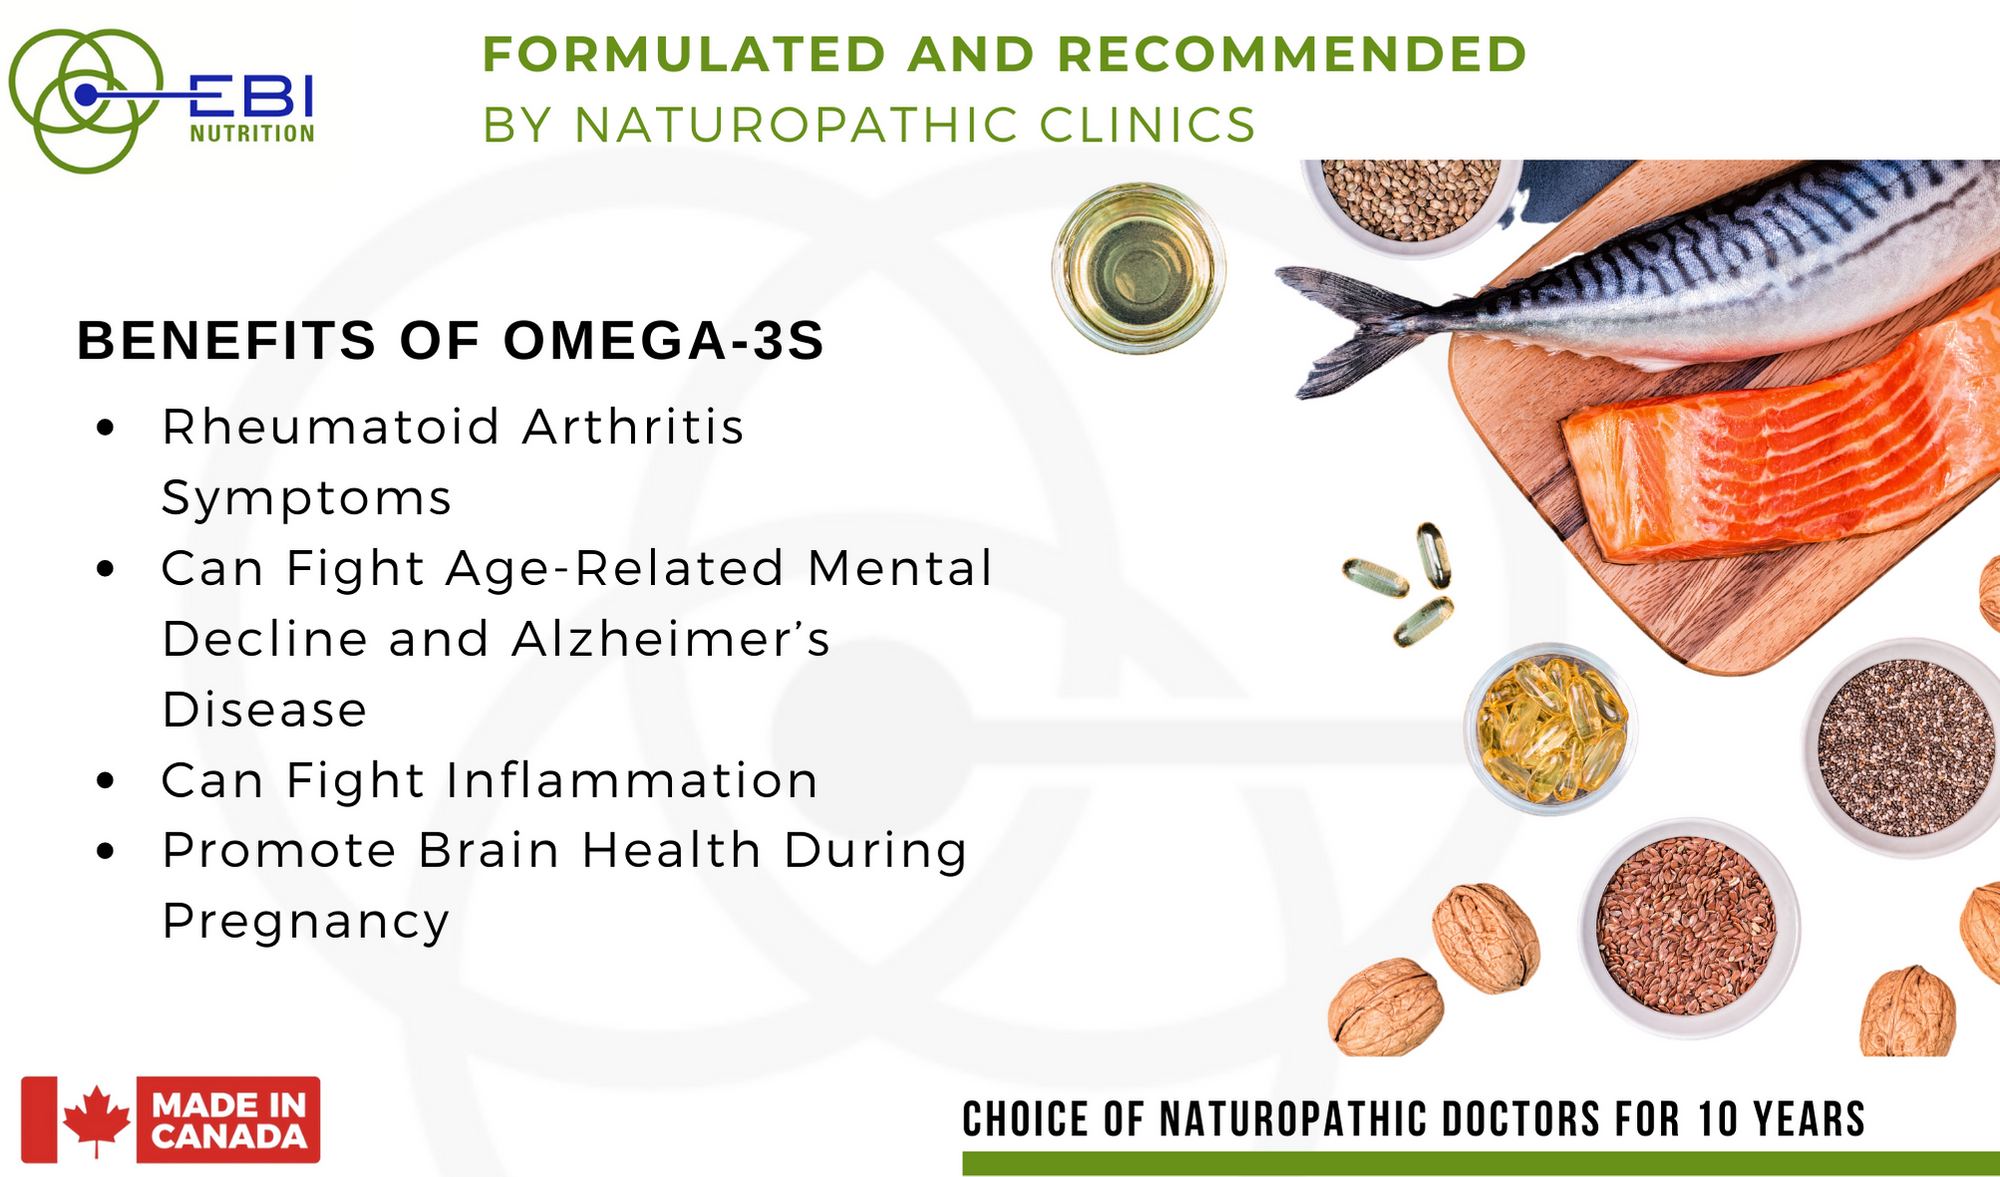 The EBI Nutrition Omega 3 Supercritical CO2 extract technology for optimal benefit